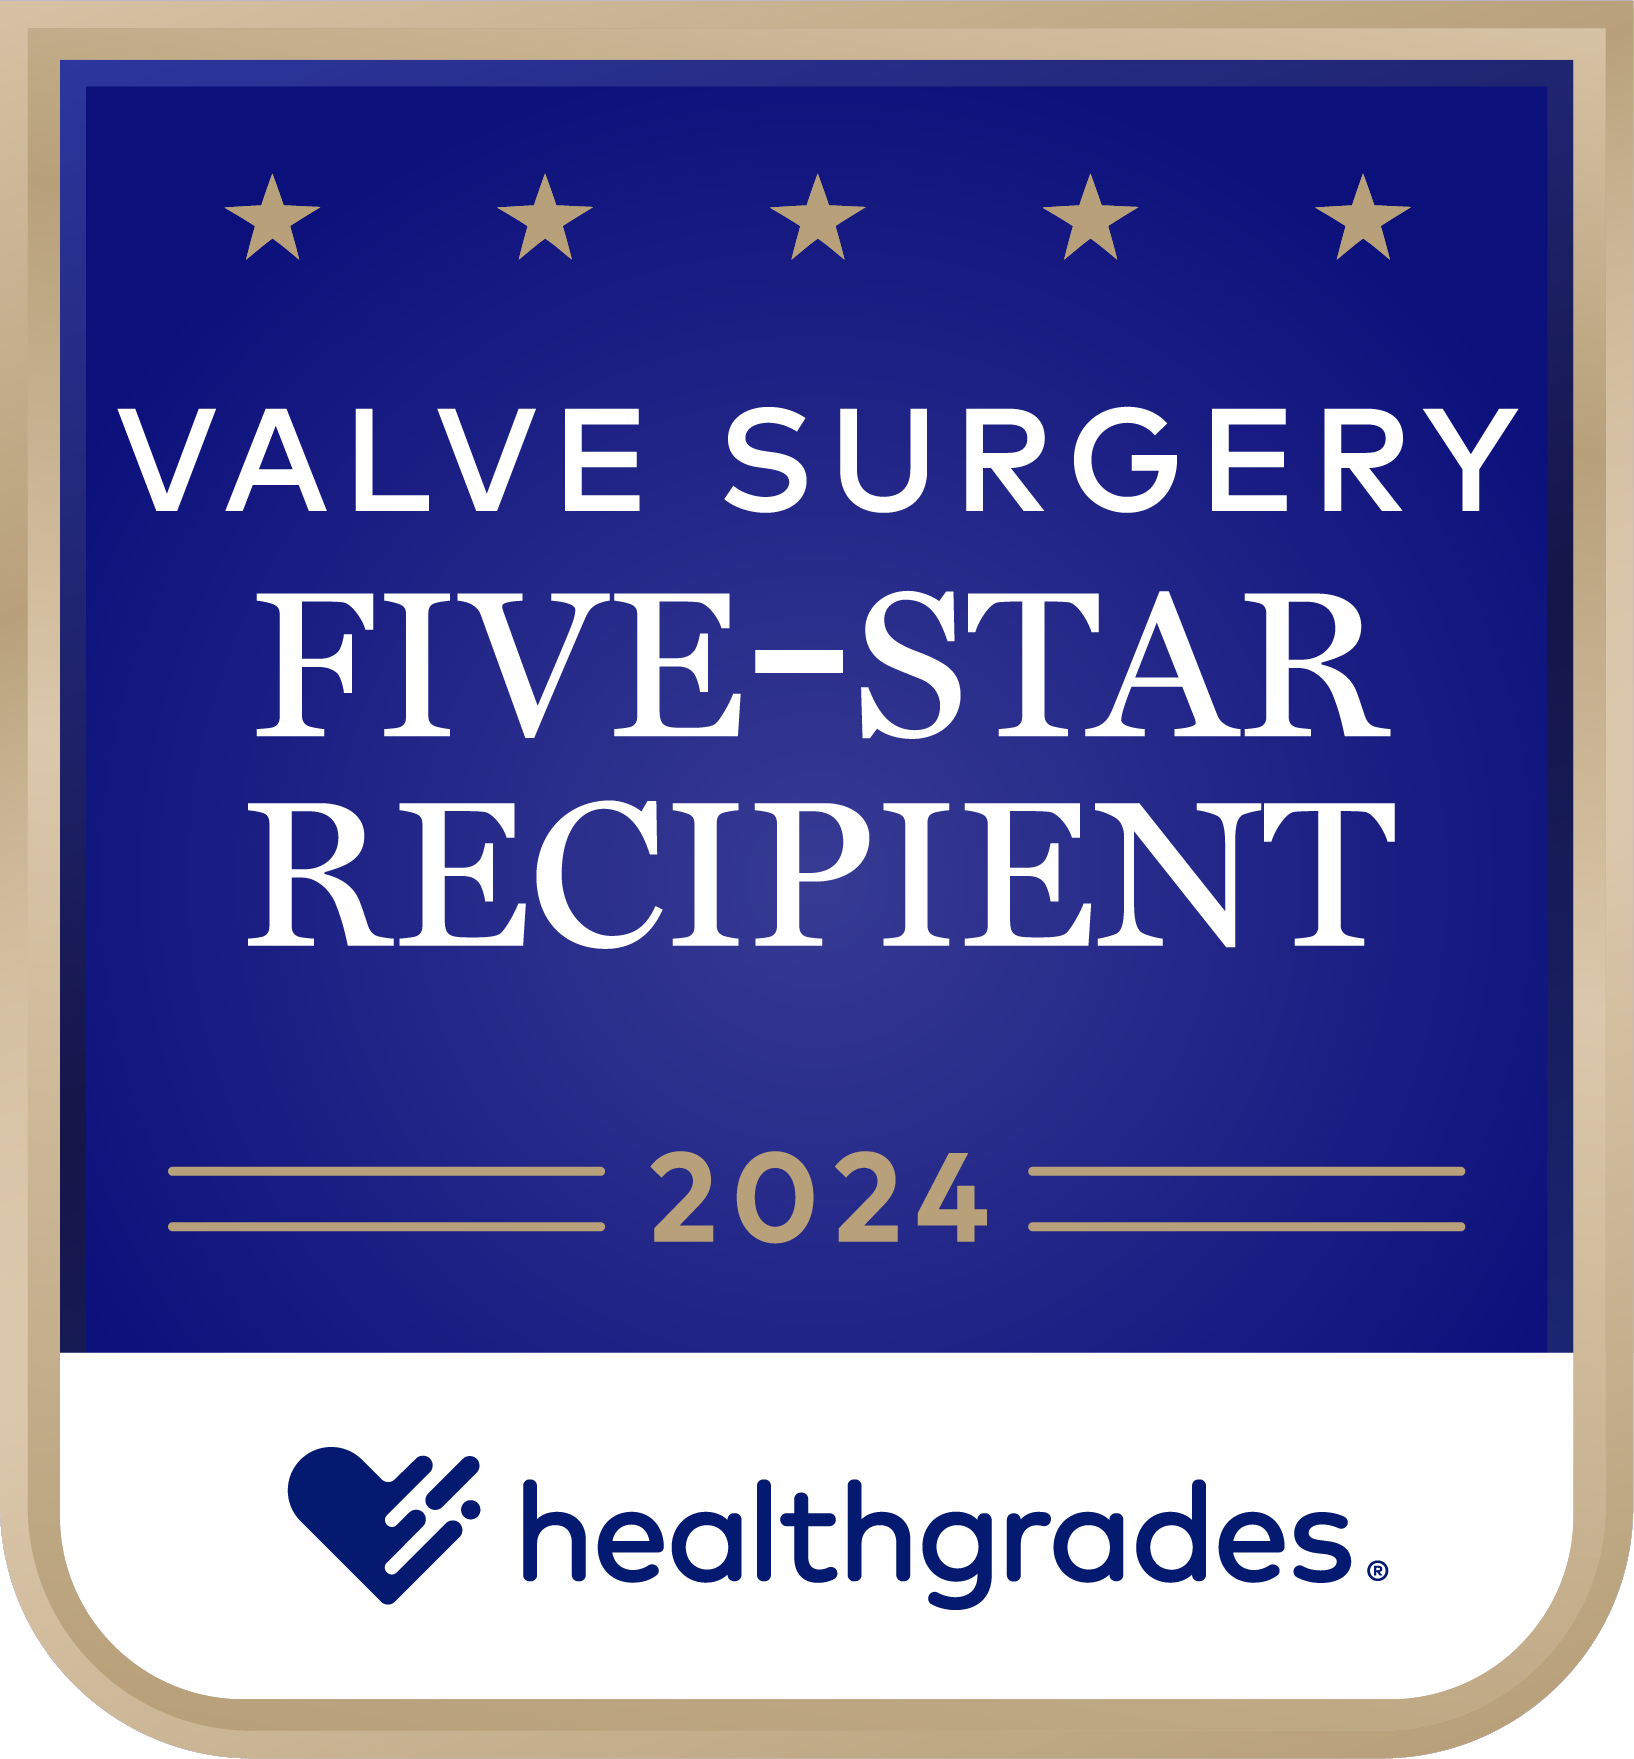 BayCare was a five-star recipient for valve surgery from 2024 healthgrades.